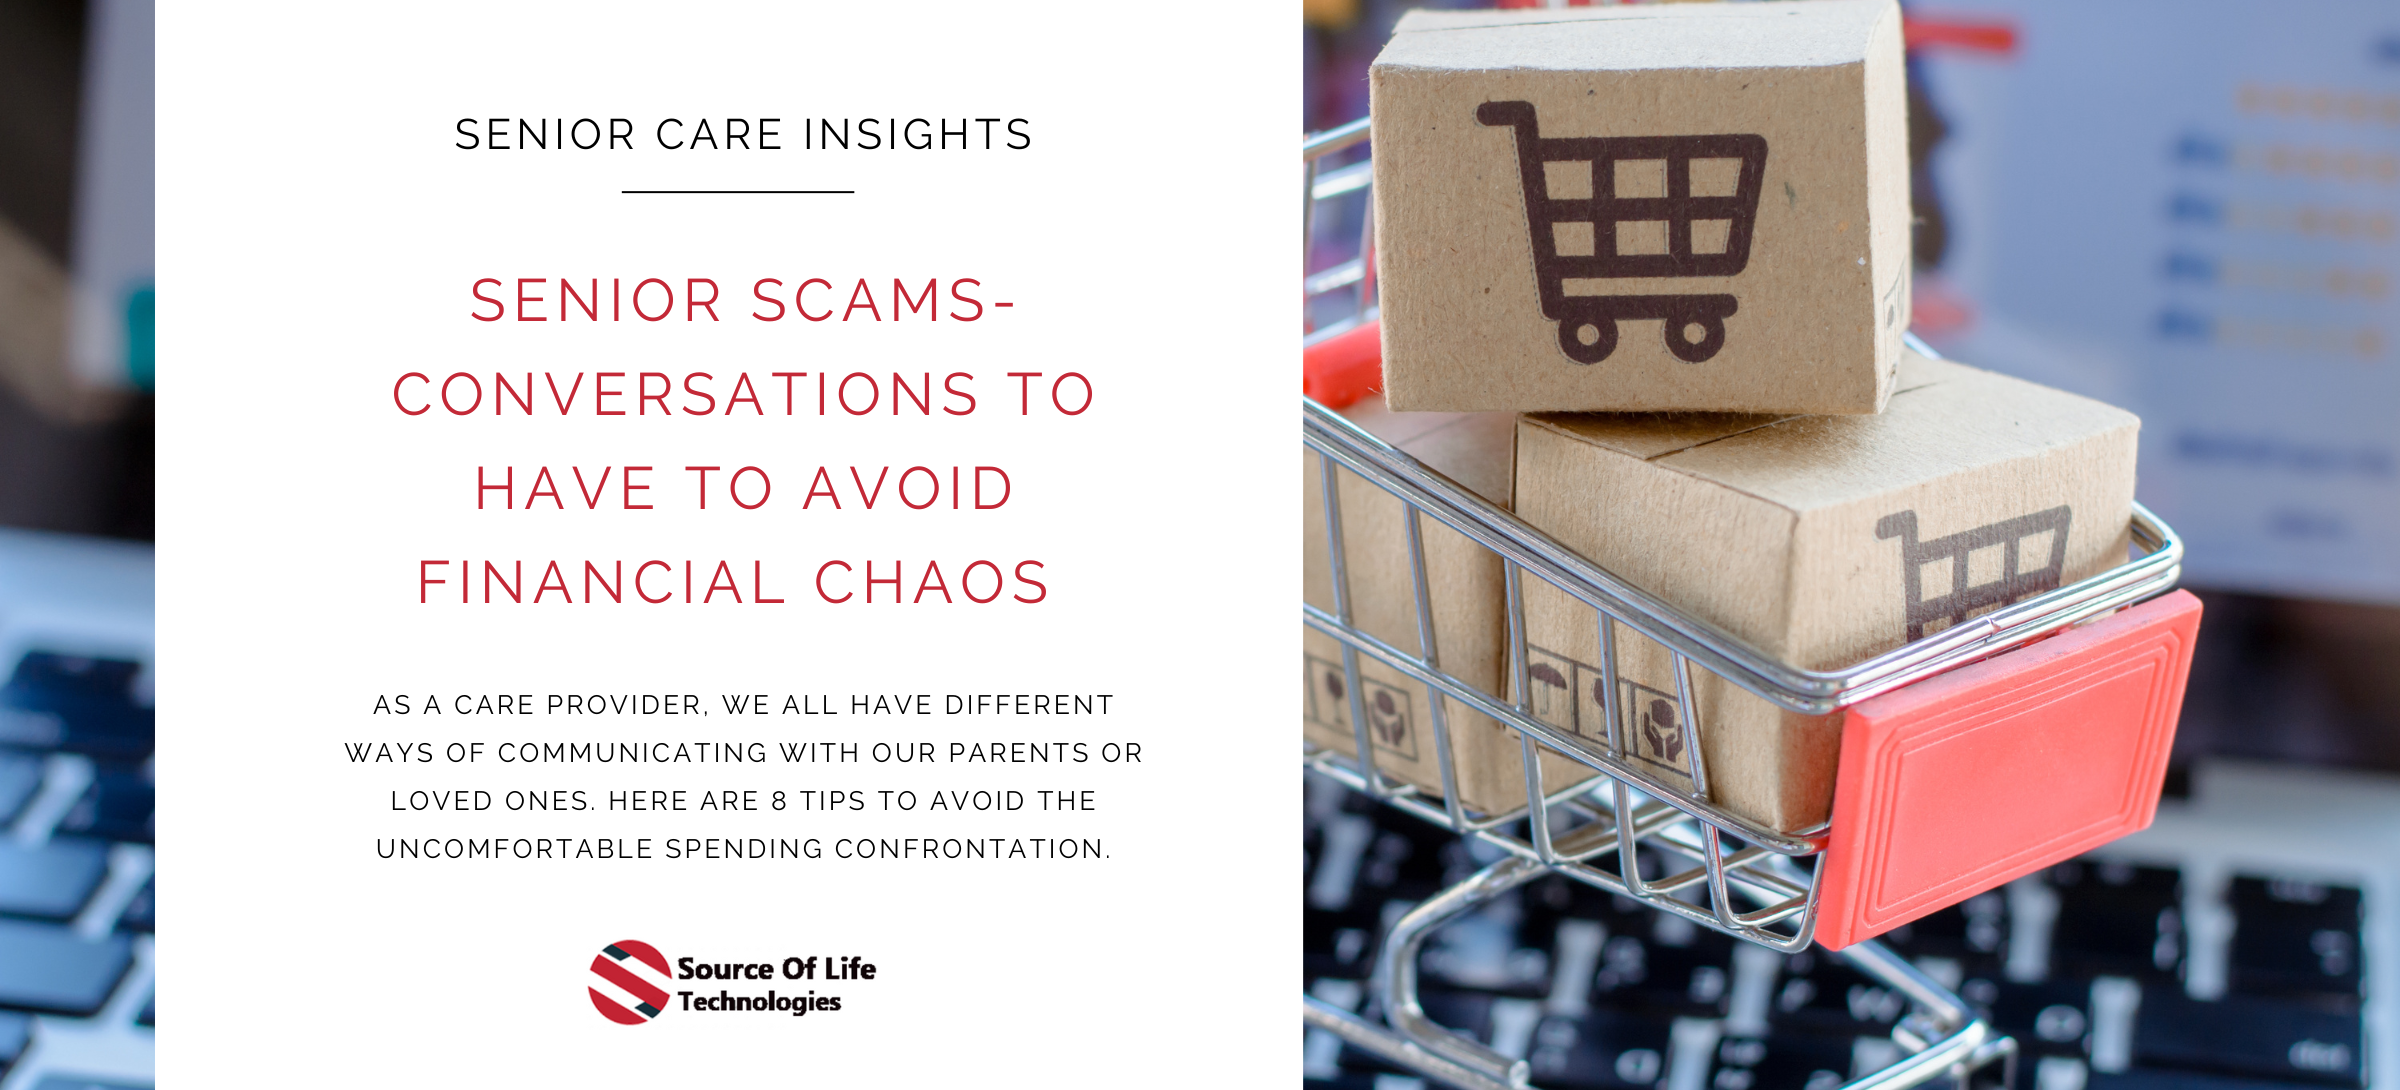 Senior Scams - Conversations To Have To Avoid Financial Chaos